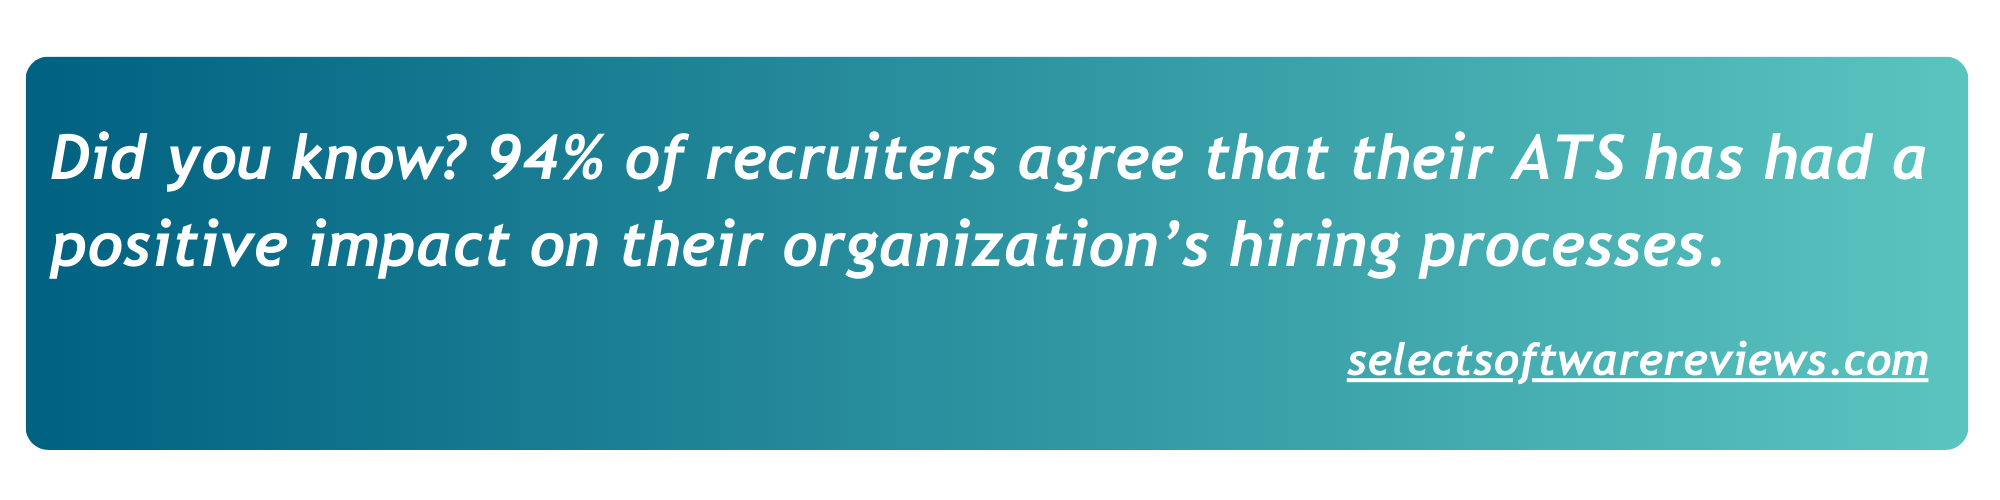 Did you know? According to recent research, 94% of recruiters agree that their ATS has had a positive impact on their organization’s hiring processes.